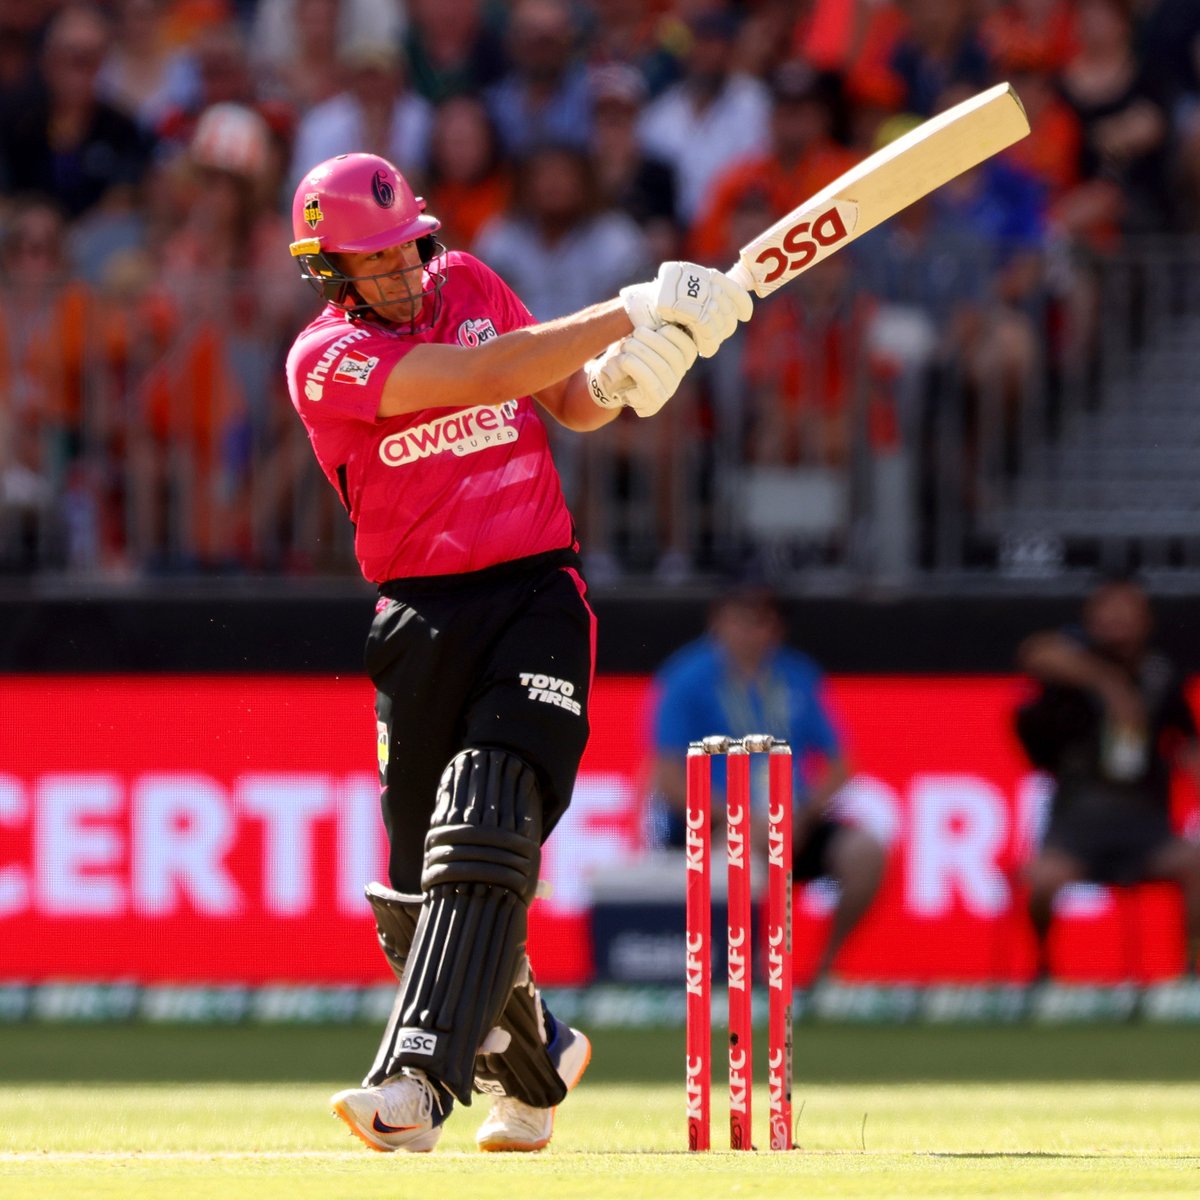 Josh Philippe, Steve Smith and Kurtis Patterson didn't hang around, but Moises Henriques has.

He brings up a much-needed 15th BBL half-century.

A quality captain's knock.

#BBL12 #smashemsixers